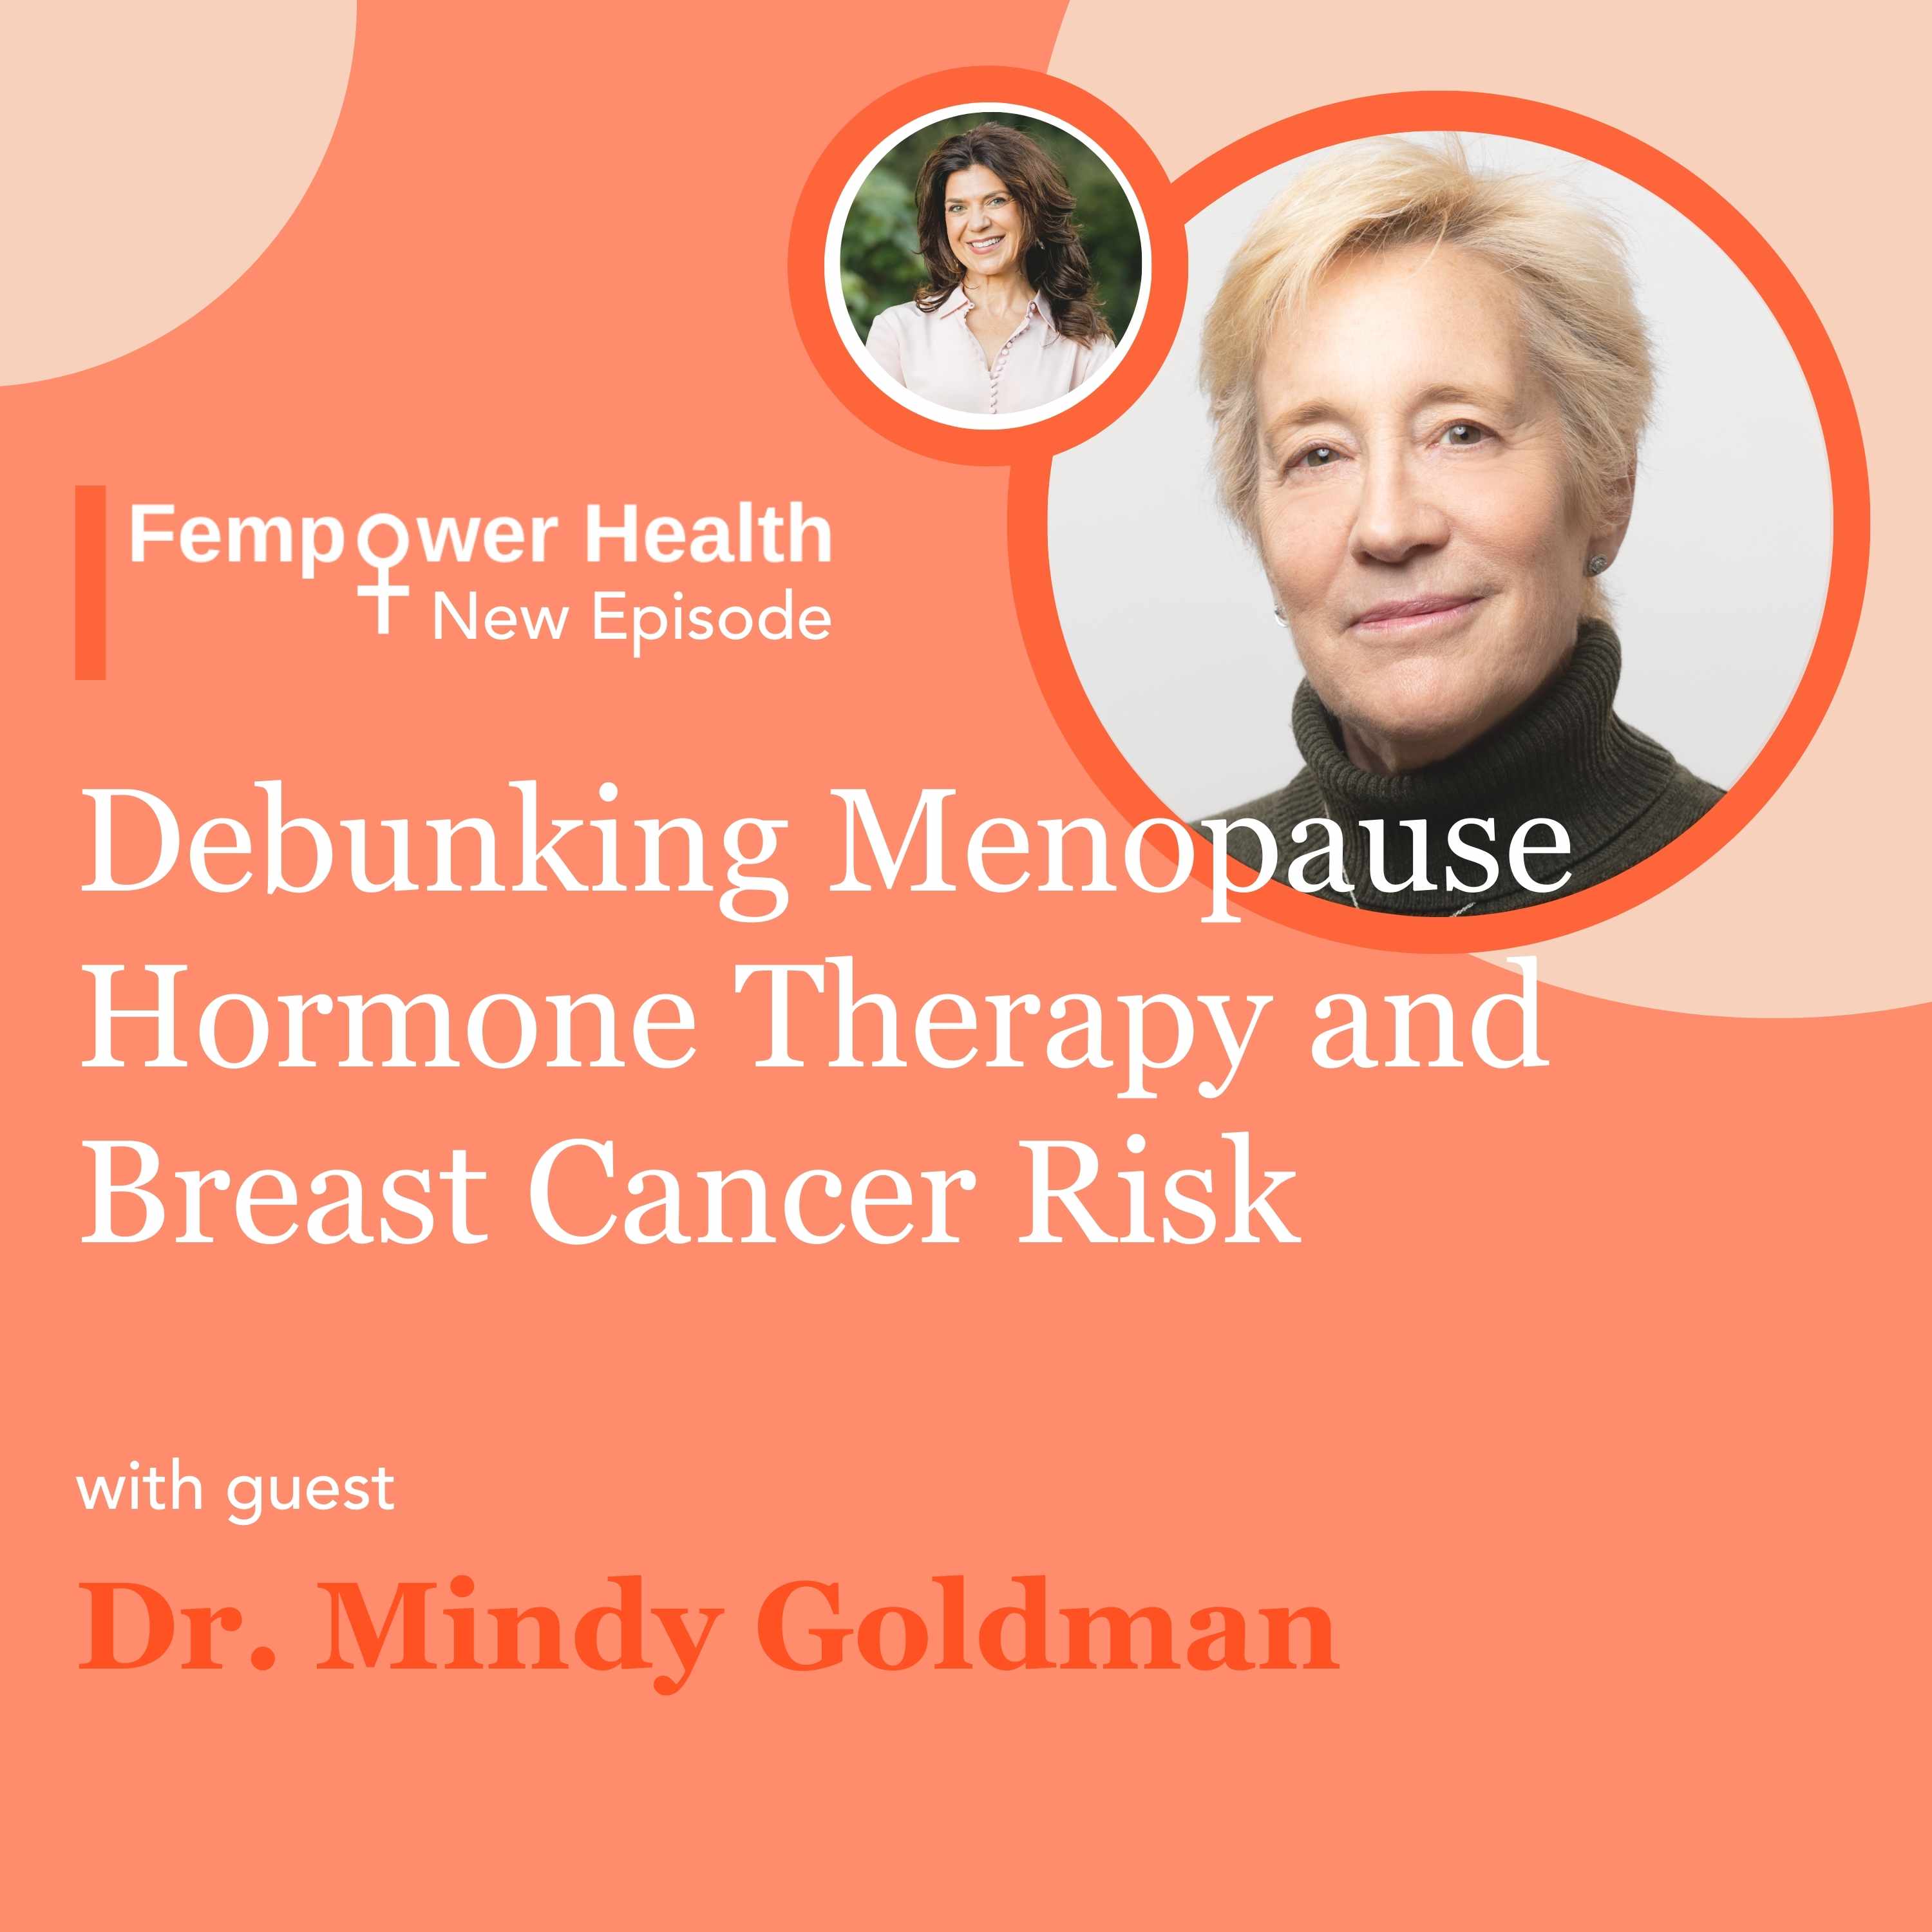 Debunking Menopause Hormone Therapy and Breast Cancer Risk | Dr. Mindy Goldman